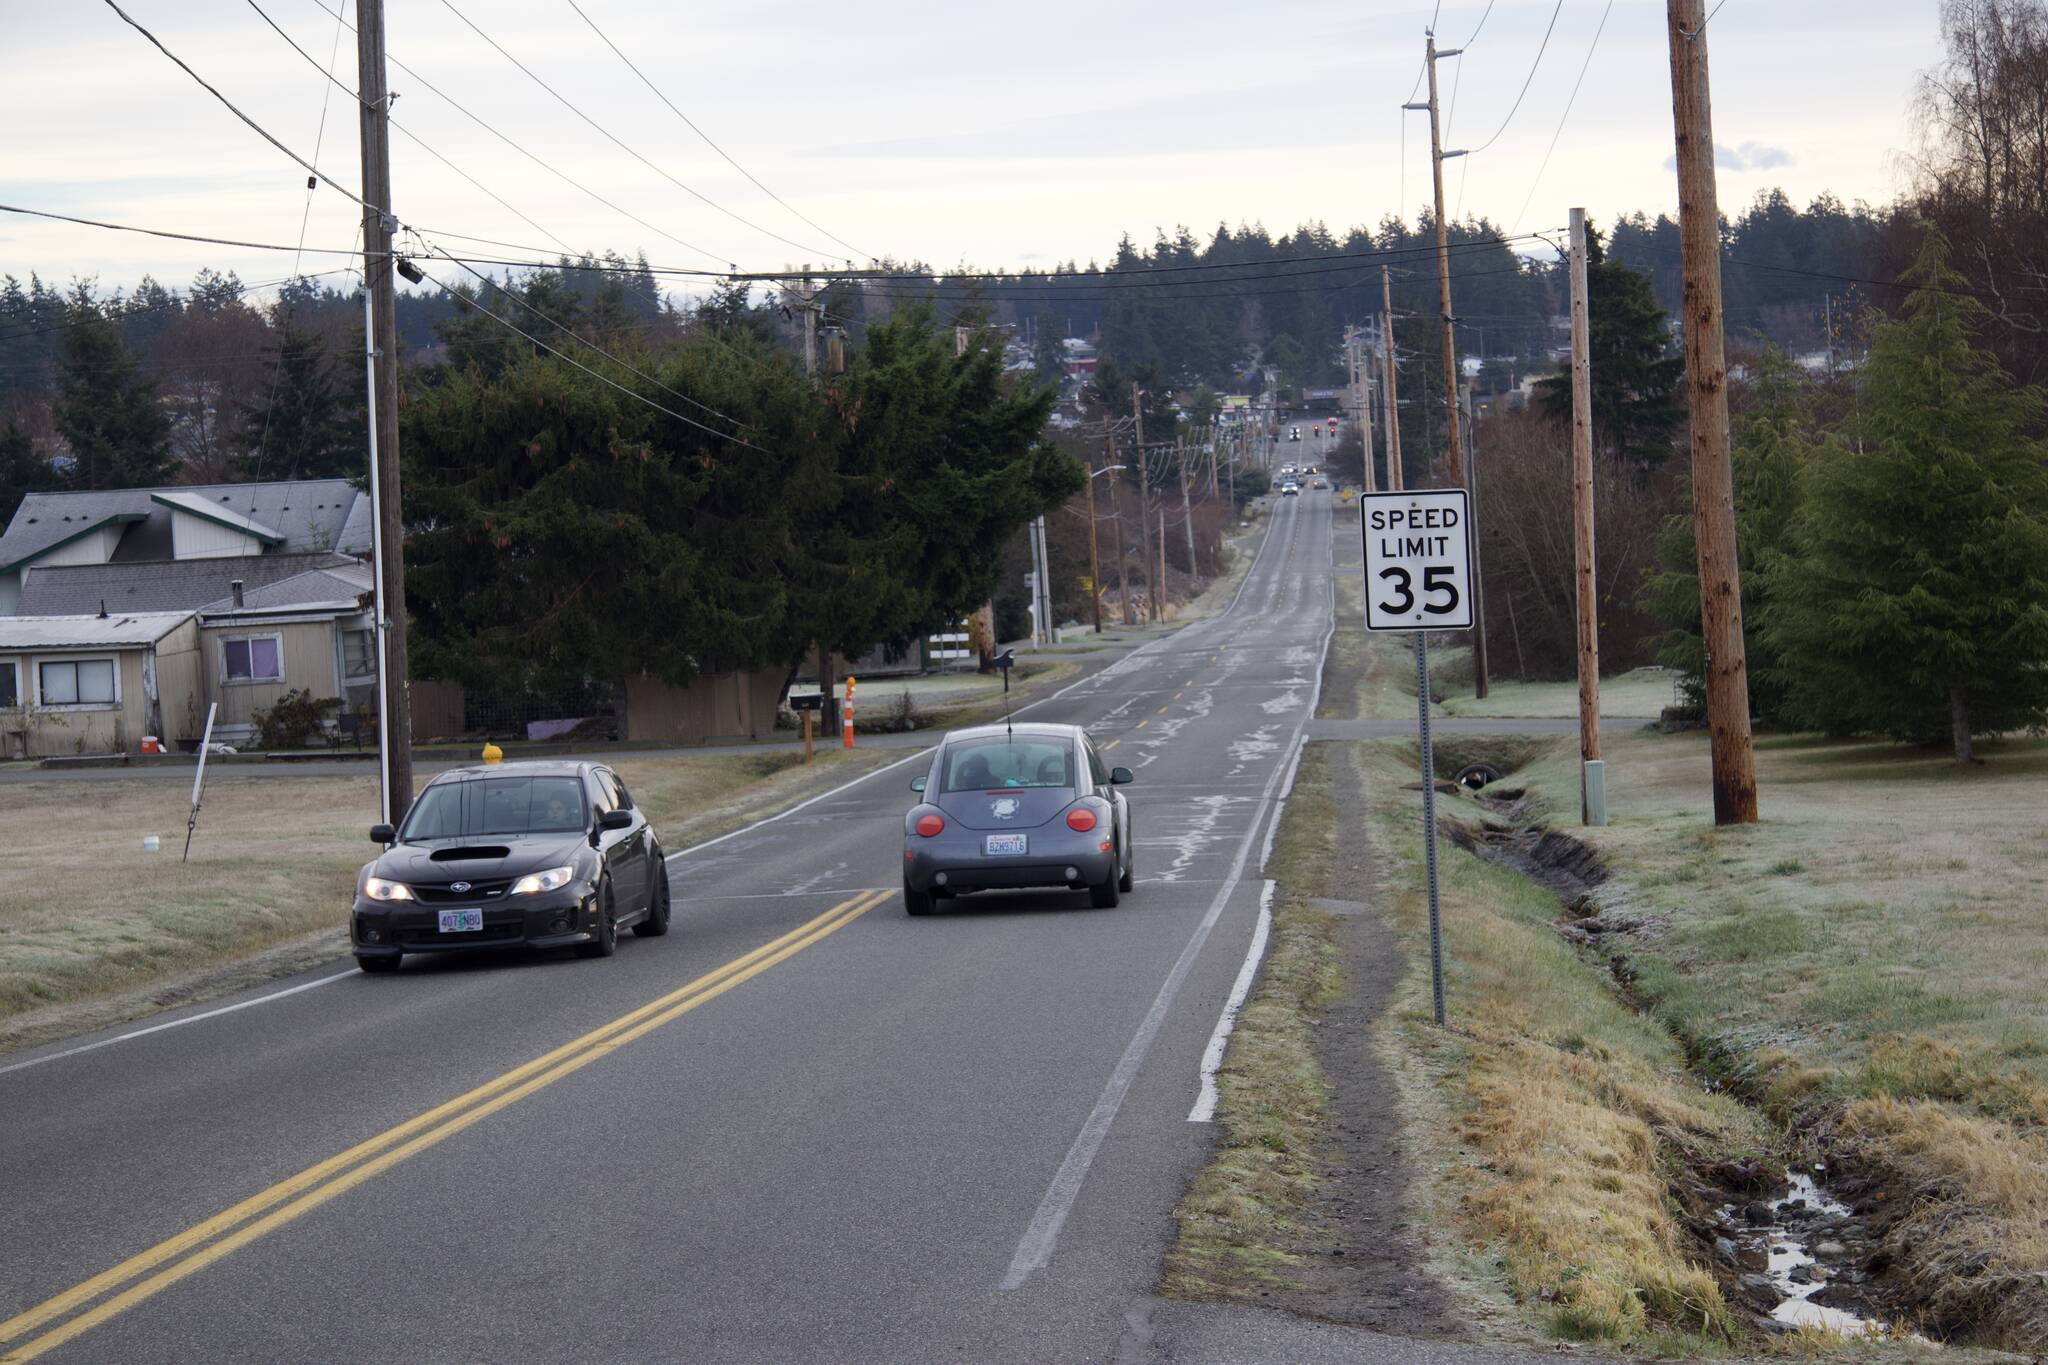 Photo by Rachel Rosen/Whidbey News-Times
Oak Harbor has received two grants to make improvements on Northeast Seventh Avenue.